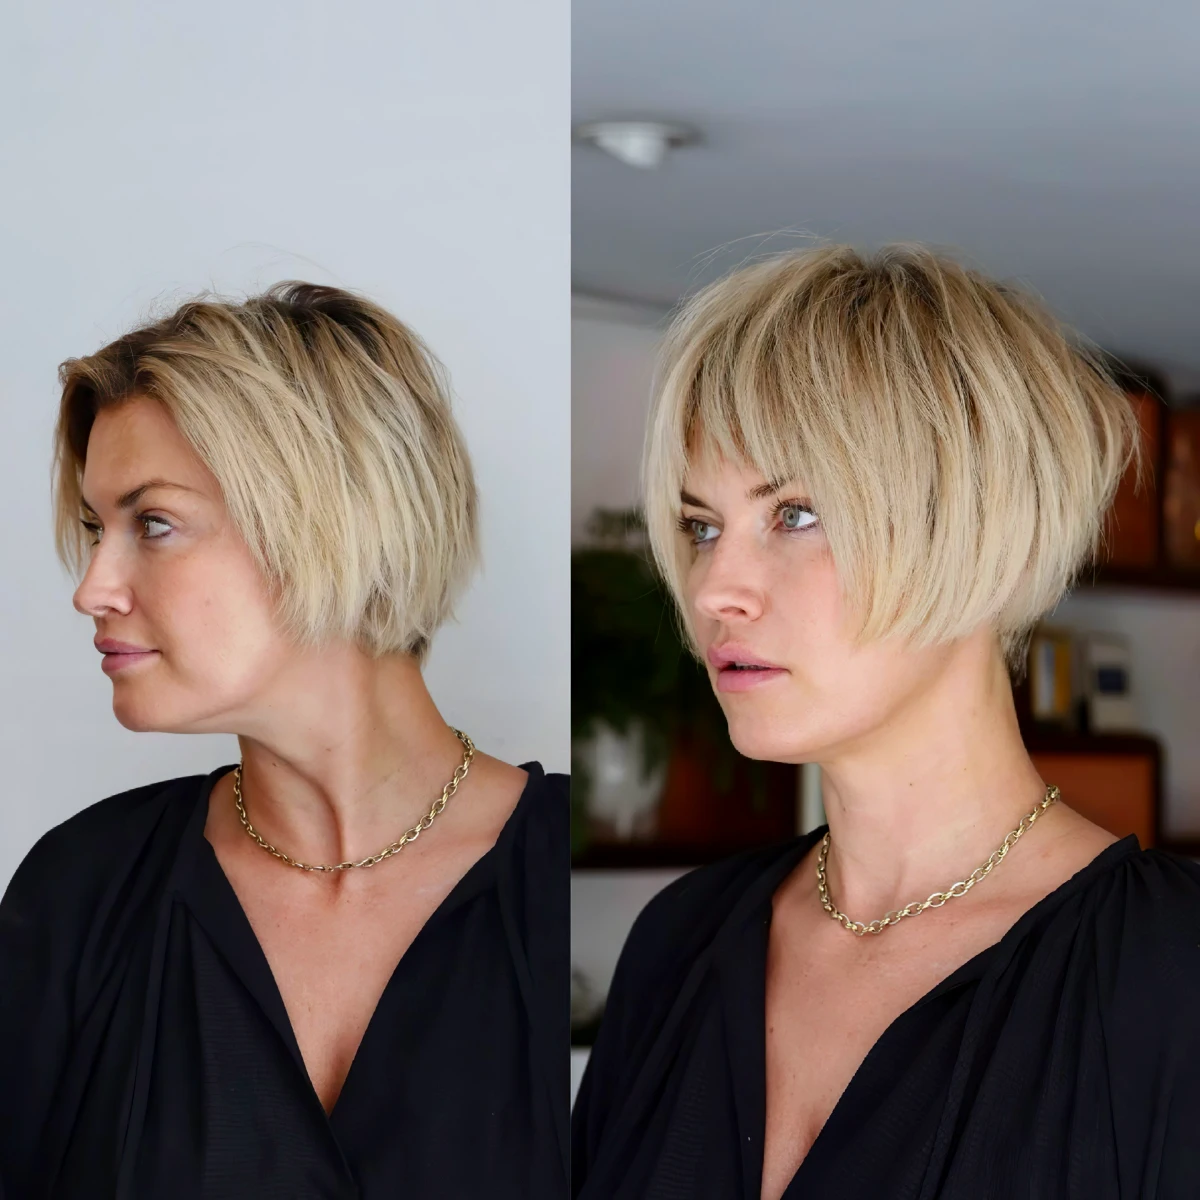 1706195963 172 6 mid short gradient haircuts for women aged 60 to look.webp - 6 mid-short gradient haircuts for women aged 60 to look younger!  Hair trends of 2024